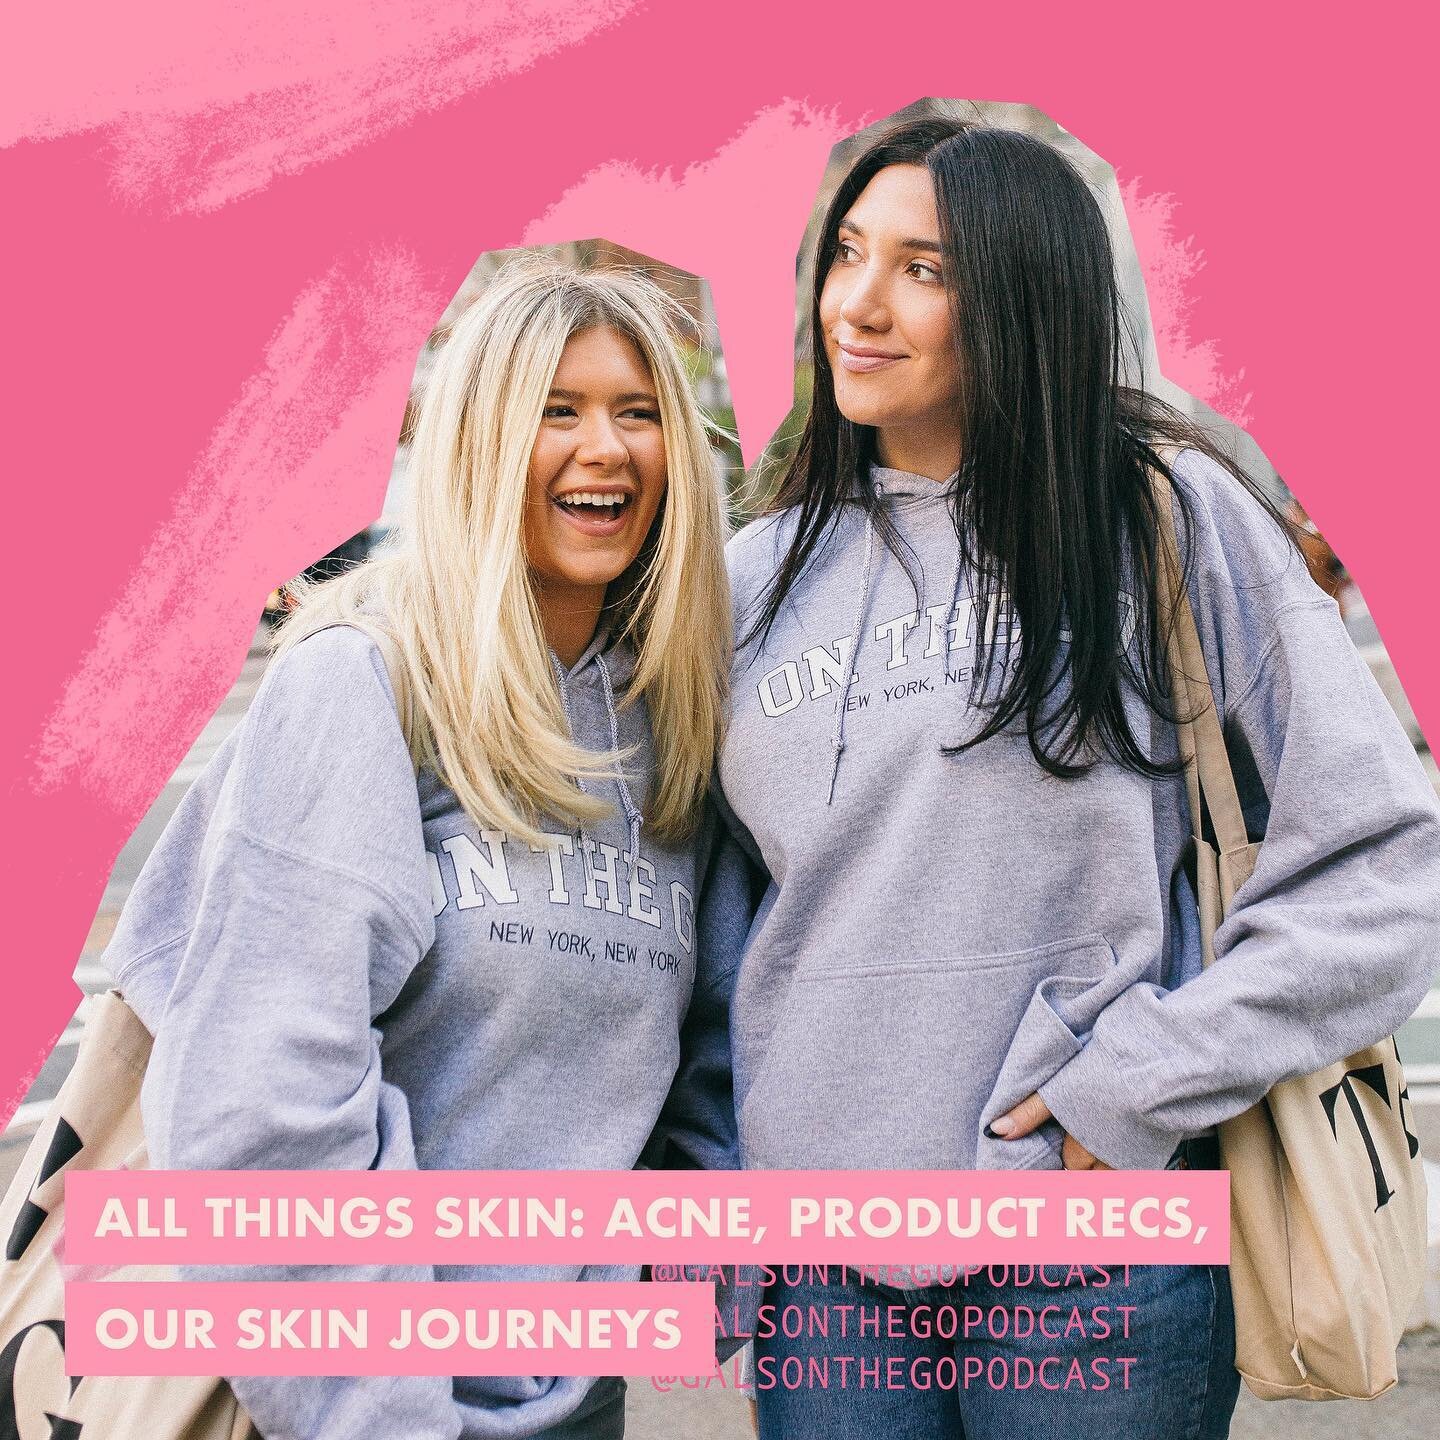 New episode for your Wednesday!! The gals talk all things SKIN &amp; their skin journeys 💗